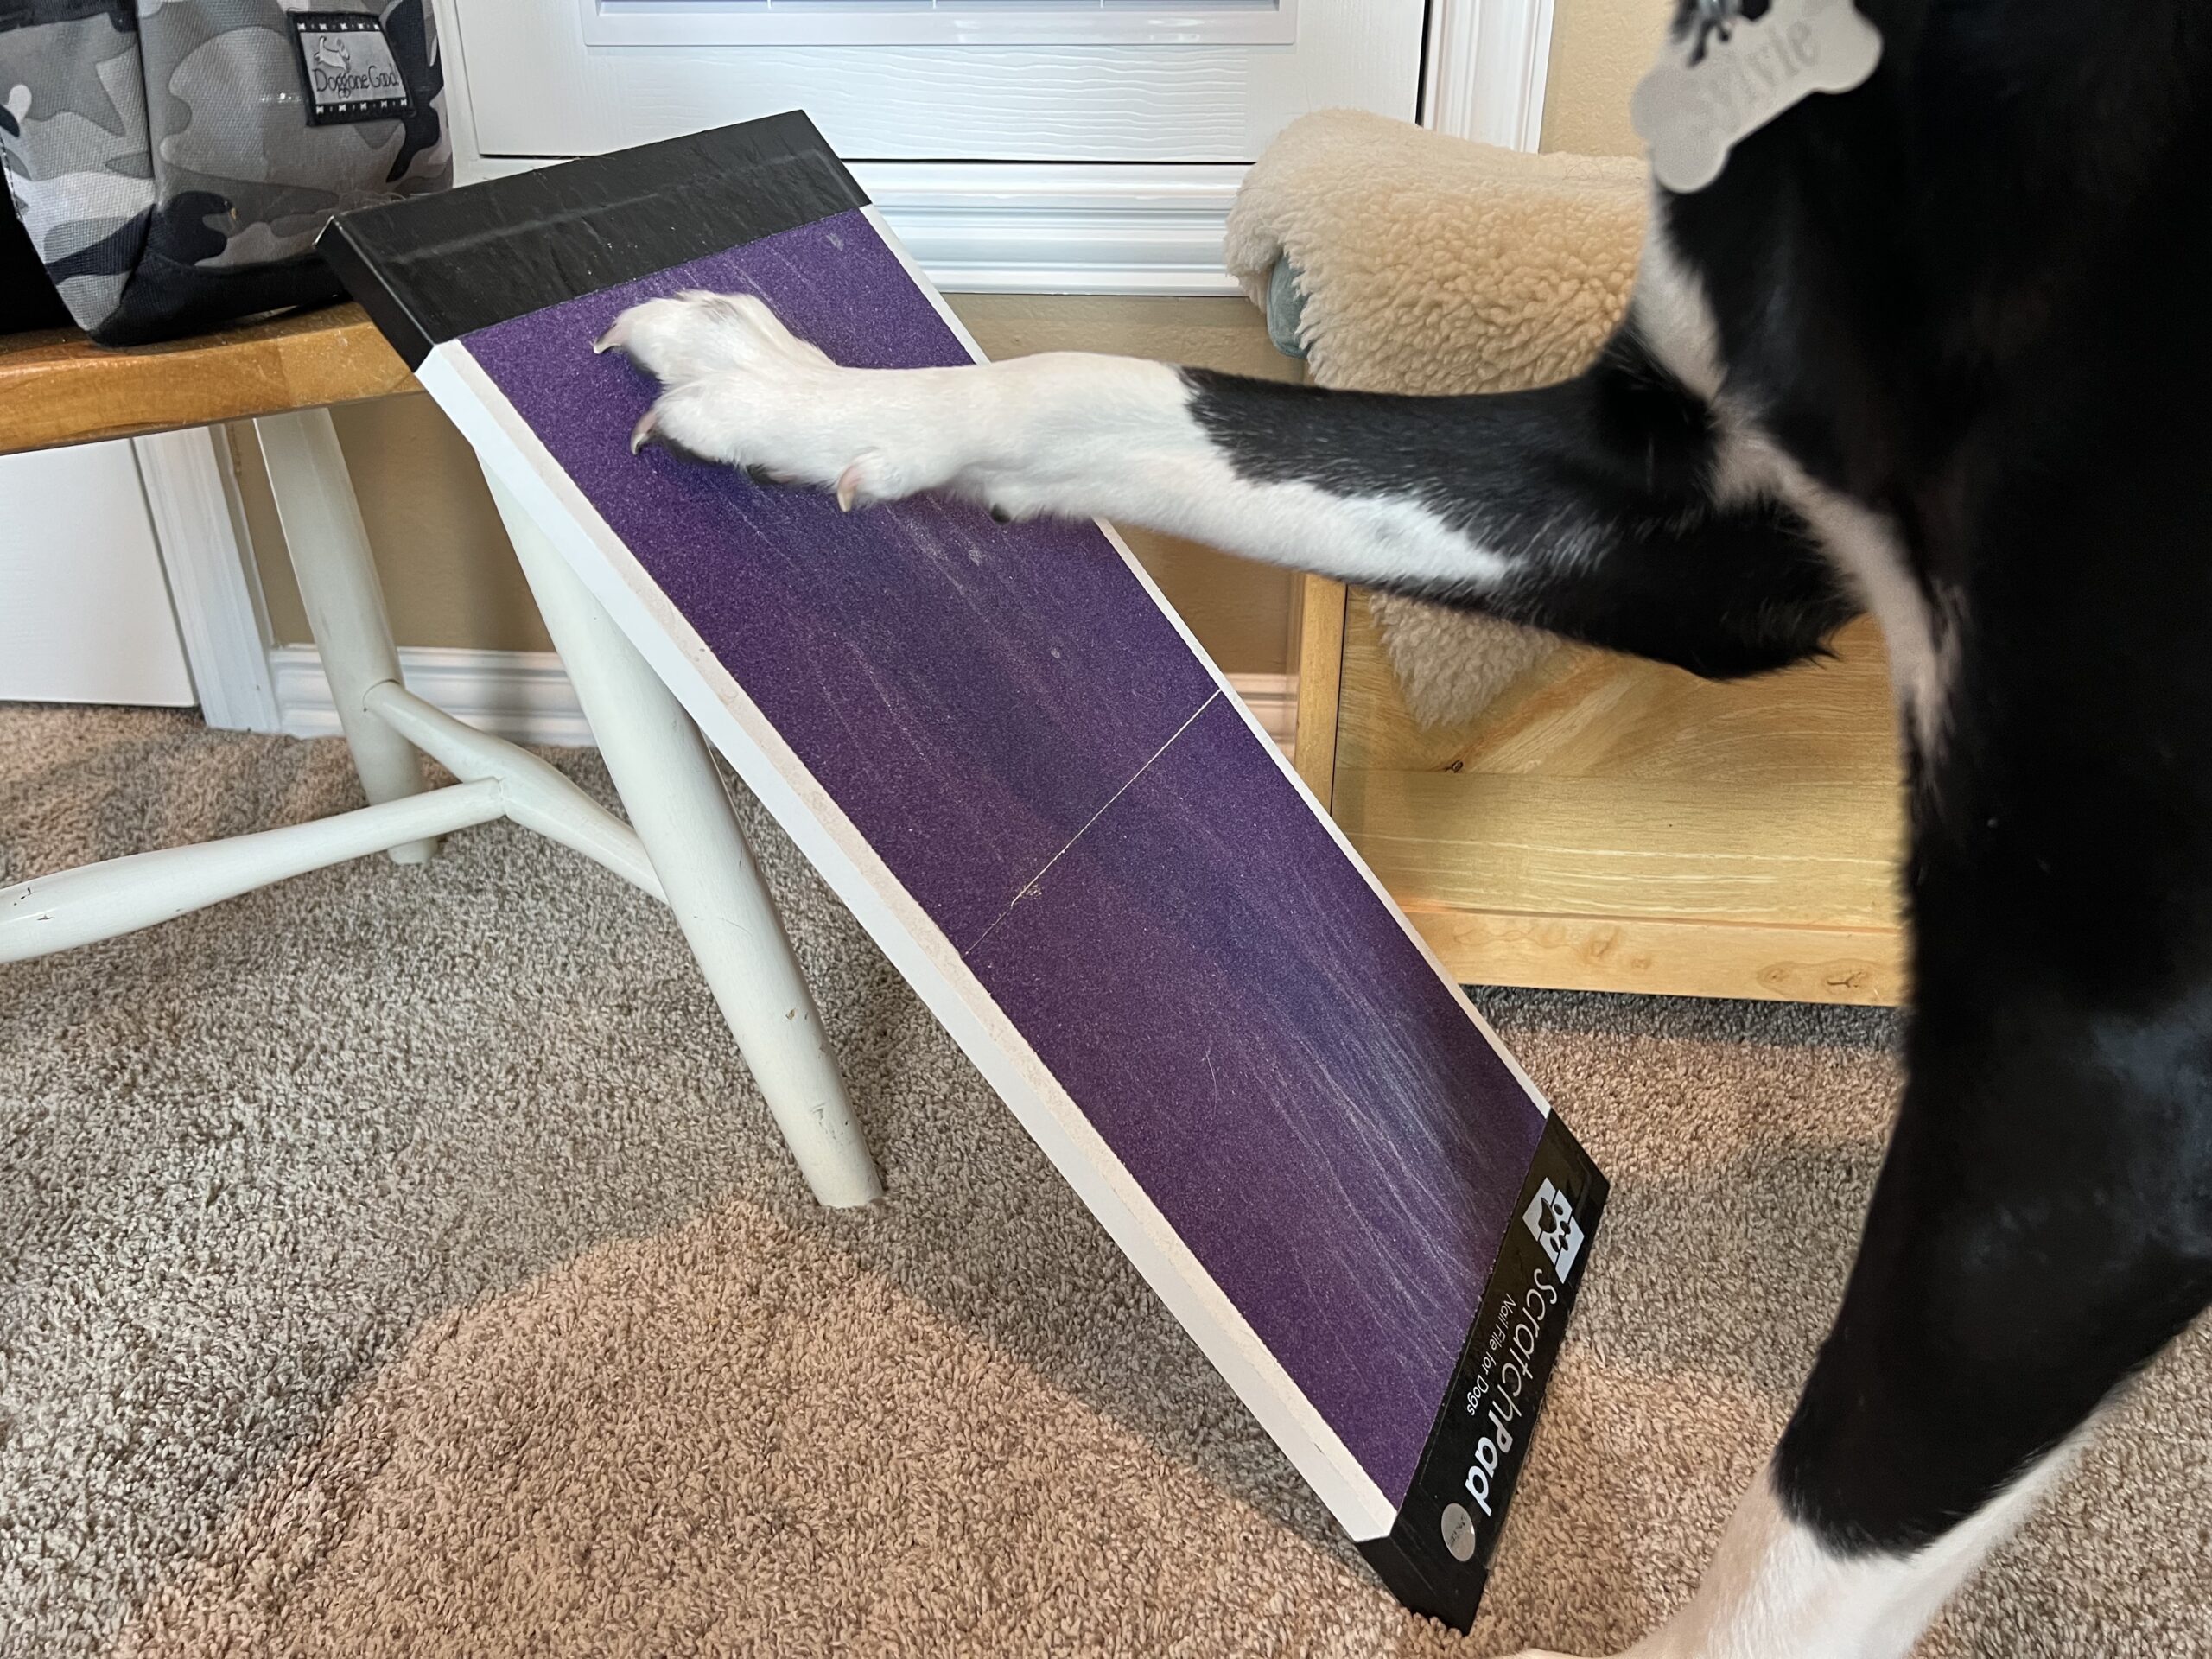 How to Teach Your Dog to Use a Scratch Board